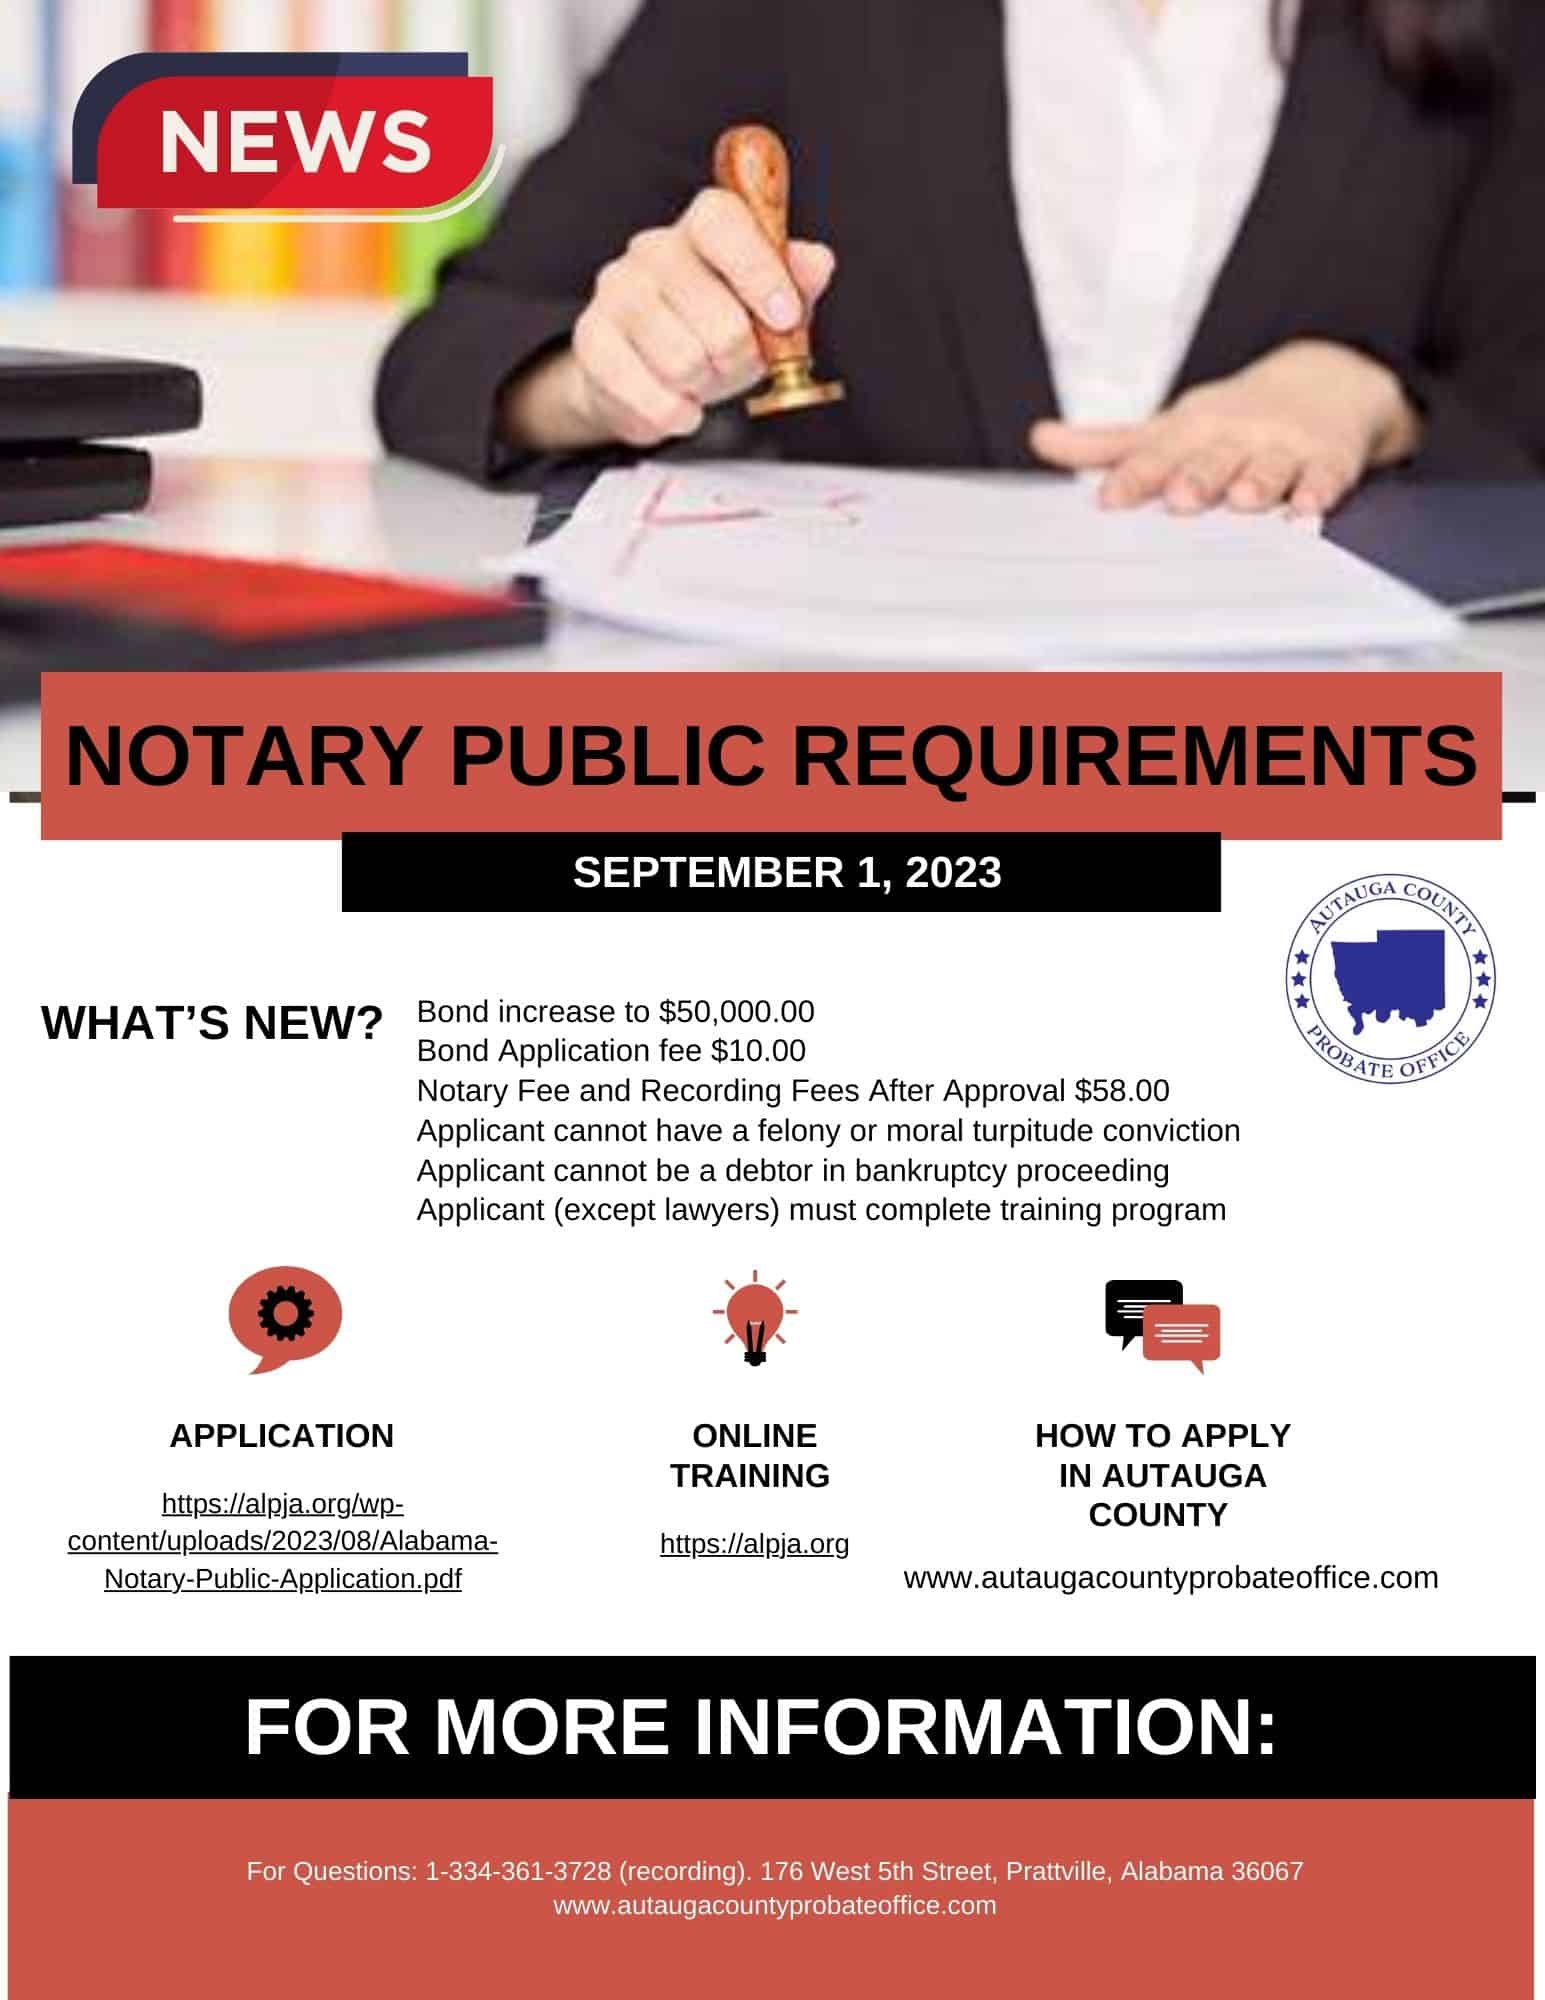 Notary Public Requirements Are Changing In Alabama Effective September